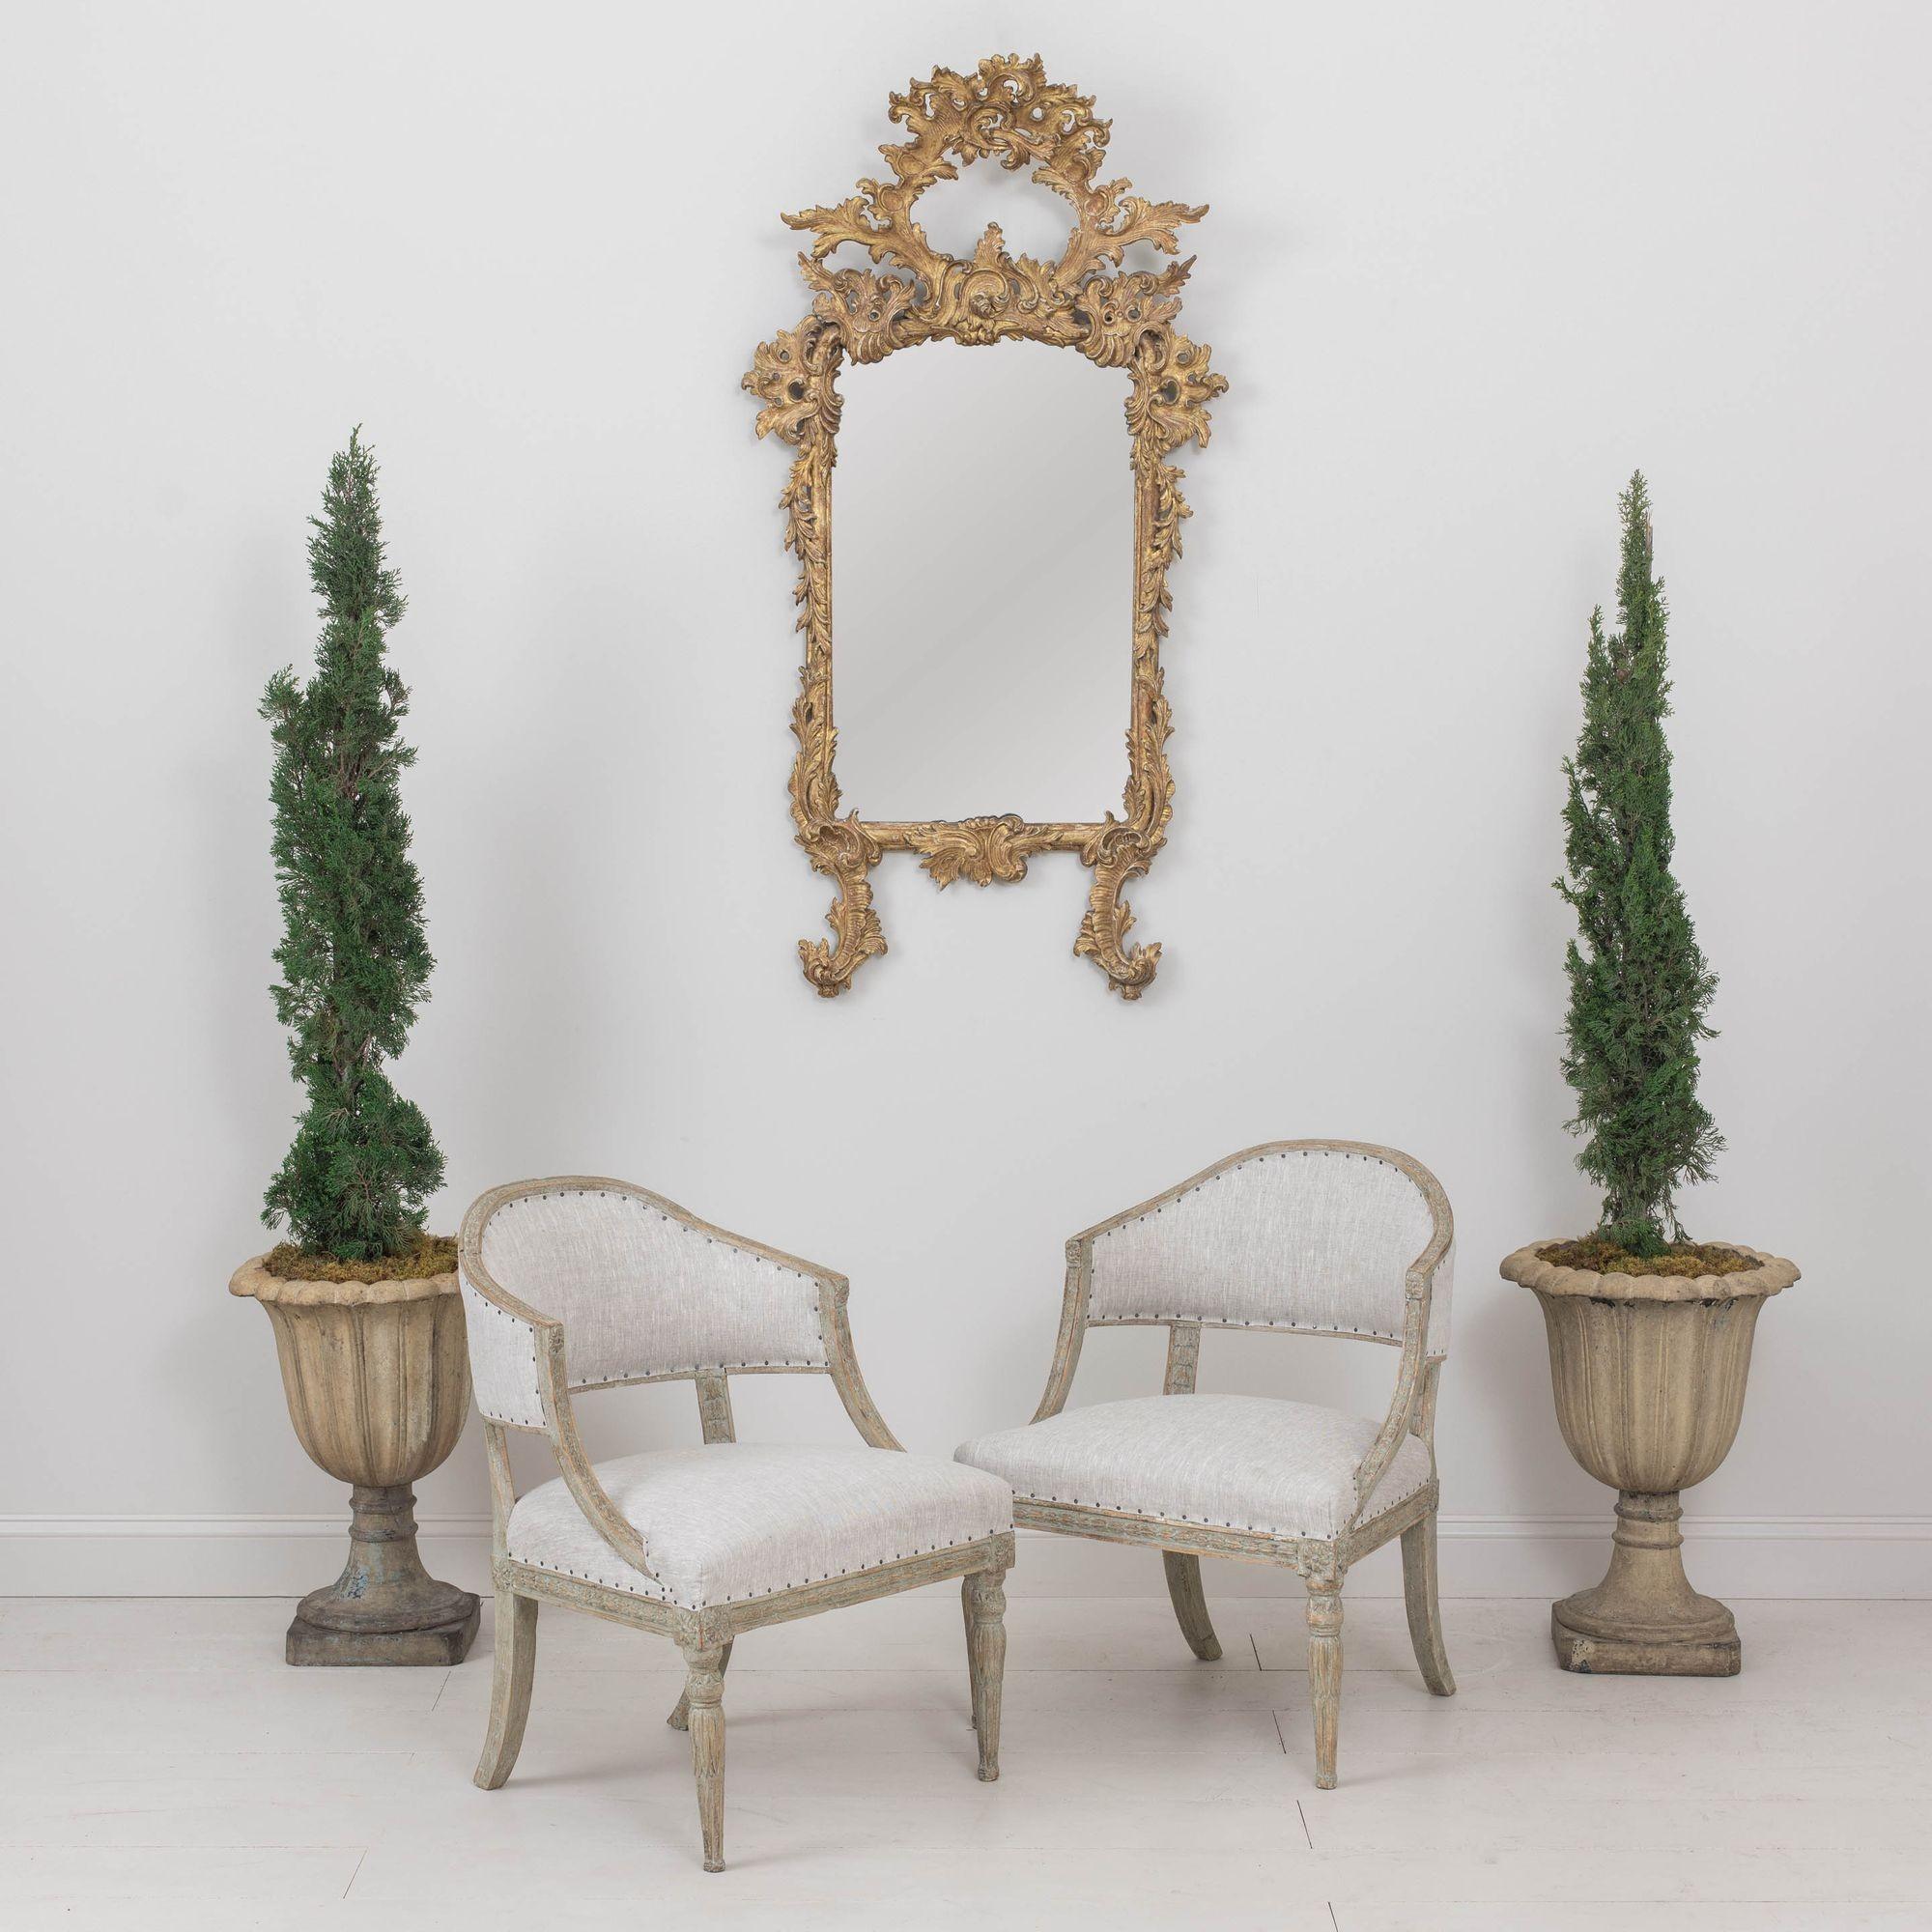 A pair of Swedish antique armchairs from the Gustavian period, circa 1810. These stunning chairs have shaped barrel backs. The frame features carved bell flowers with front legs adorned with lotus flowers and rosettes. This pair has been newly